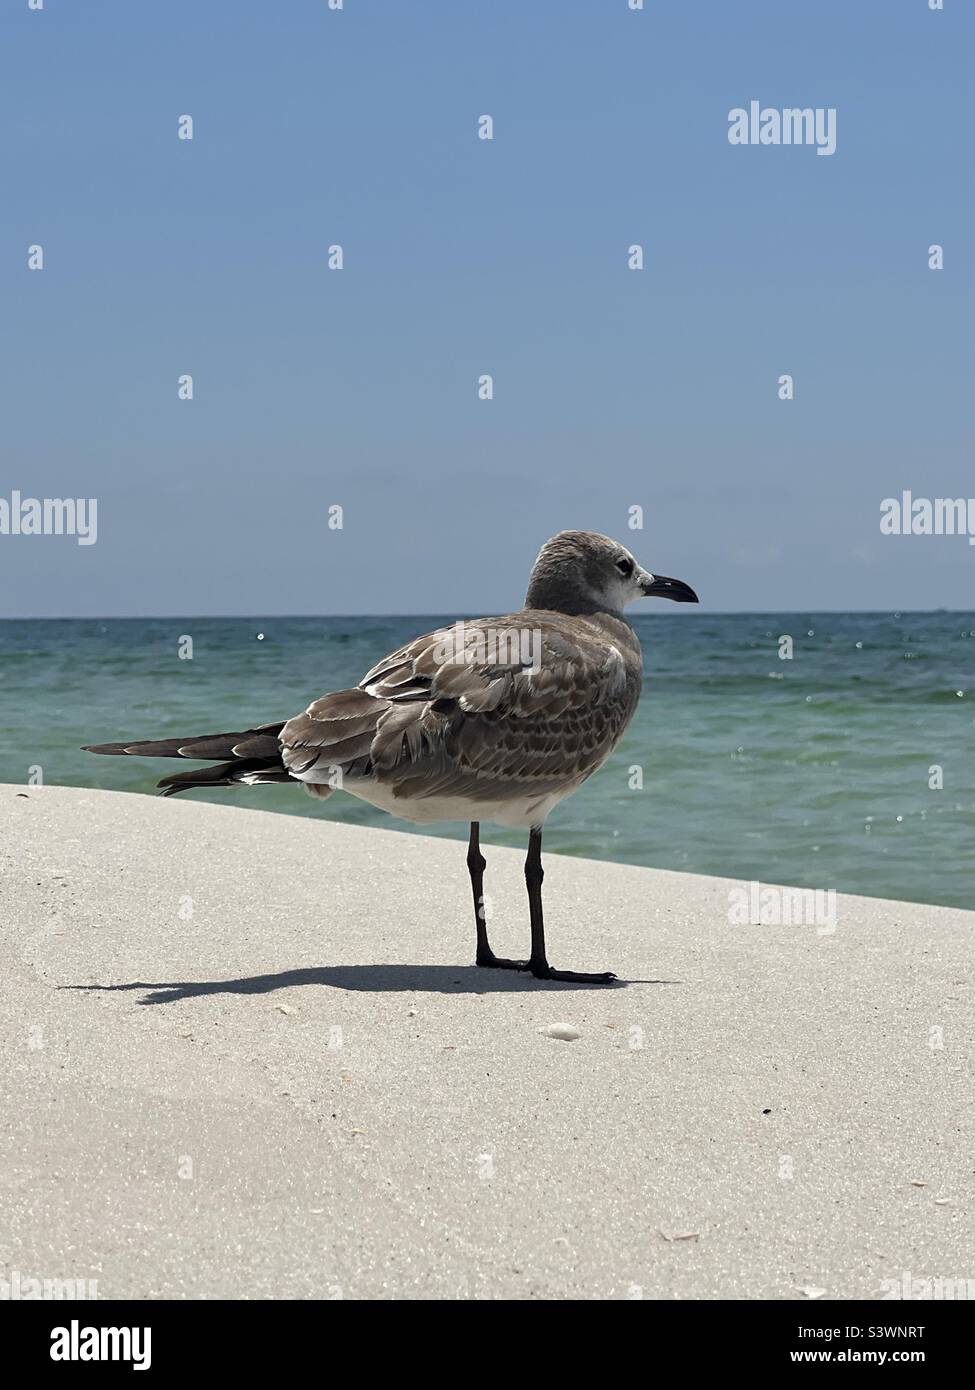 Seagull standing on the beach looking out onto the Gulf of Mexico Florida Emerald Coast Stock Photo